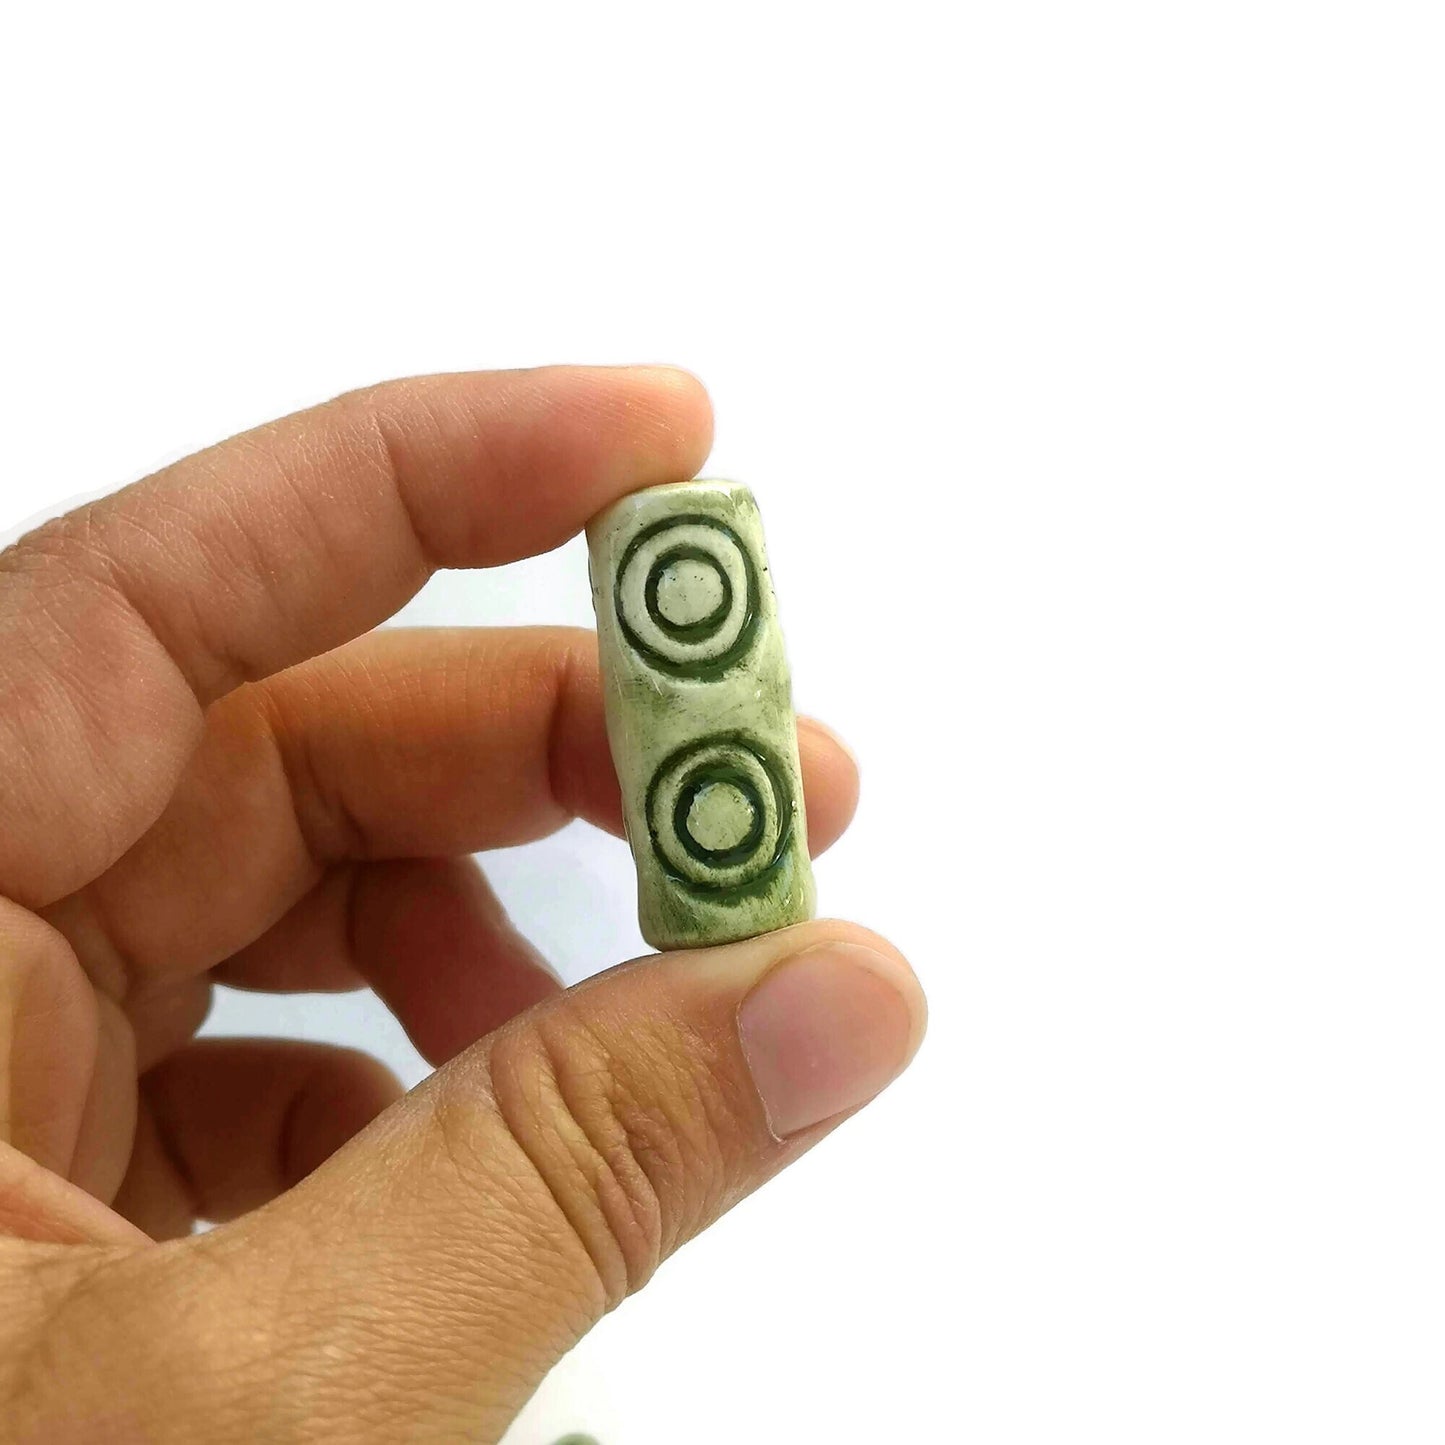 6 Pcs Unique Macrame Beads Large Hole 4 mm, Ceramic Tube Beads 30mm Long For Jewelry Making, Best Sellers Green Clay Beads - Ceramica Ana Rafael